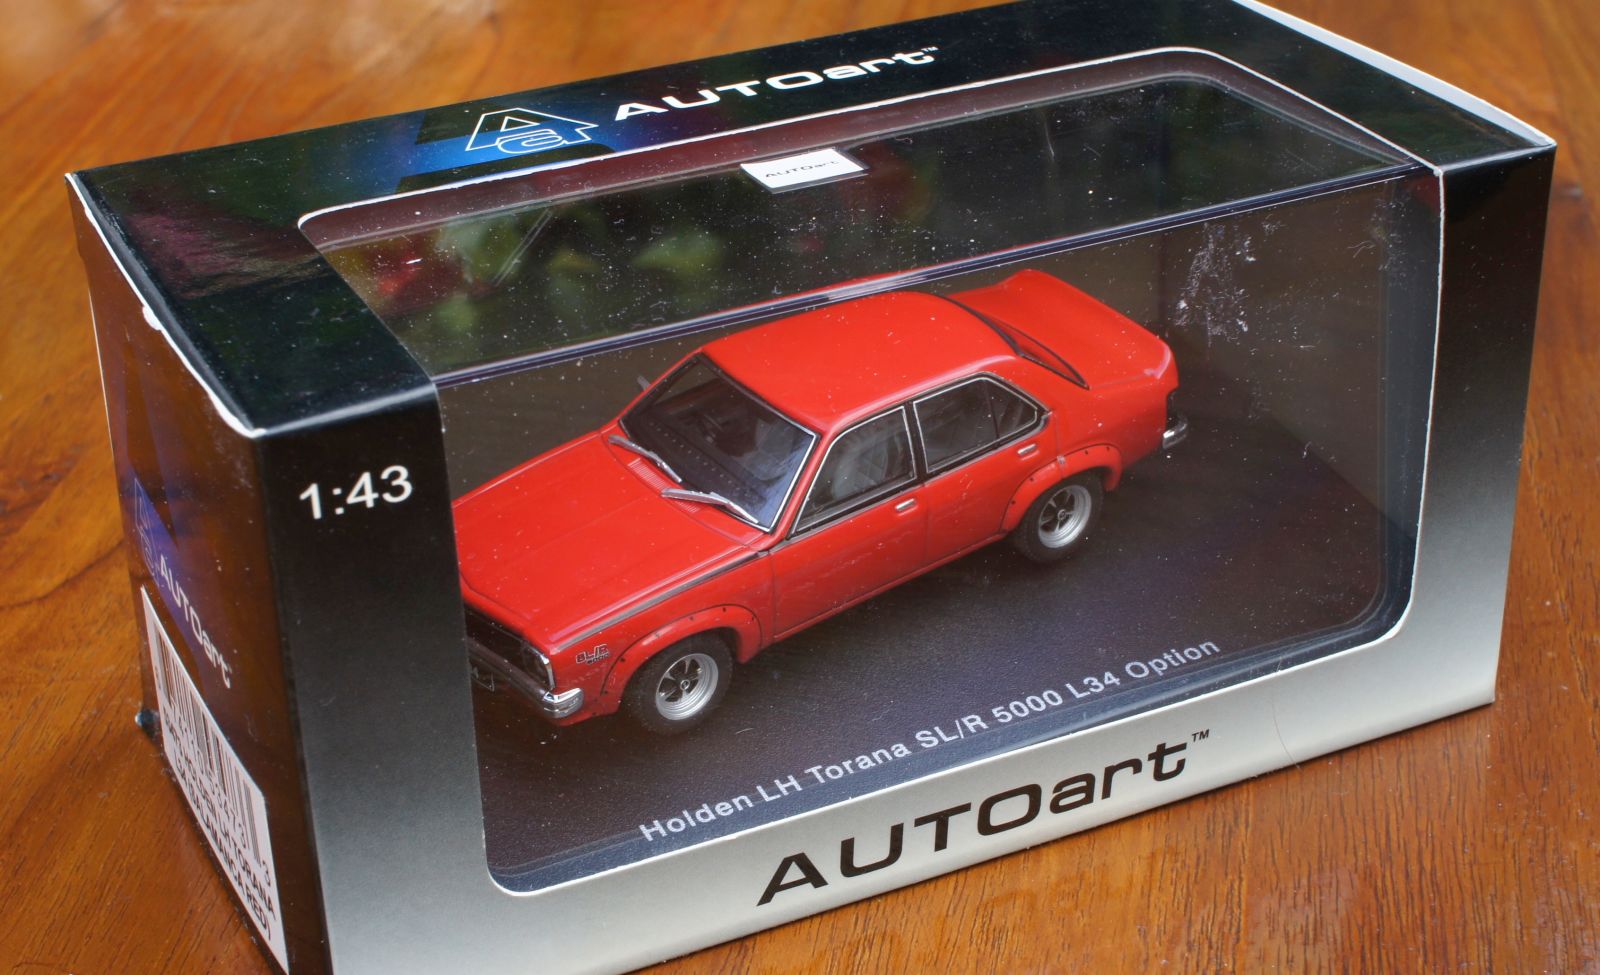 Saving the best for last? Certainly. But this ain’t the last item. It is epic though, this 1/43 AutoArt Holden LH Torana SL/R